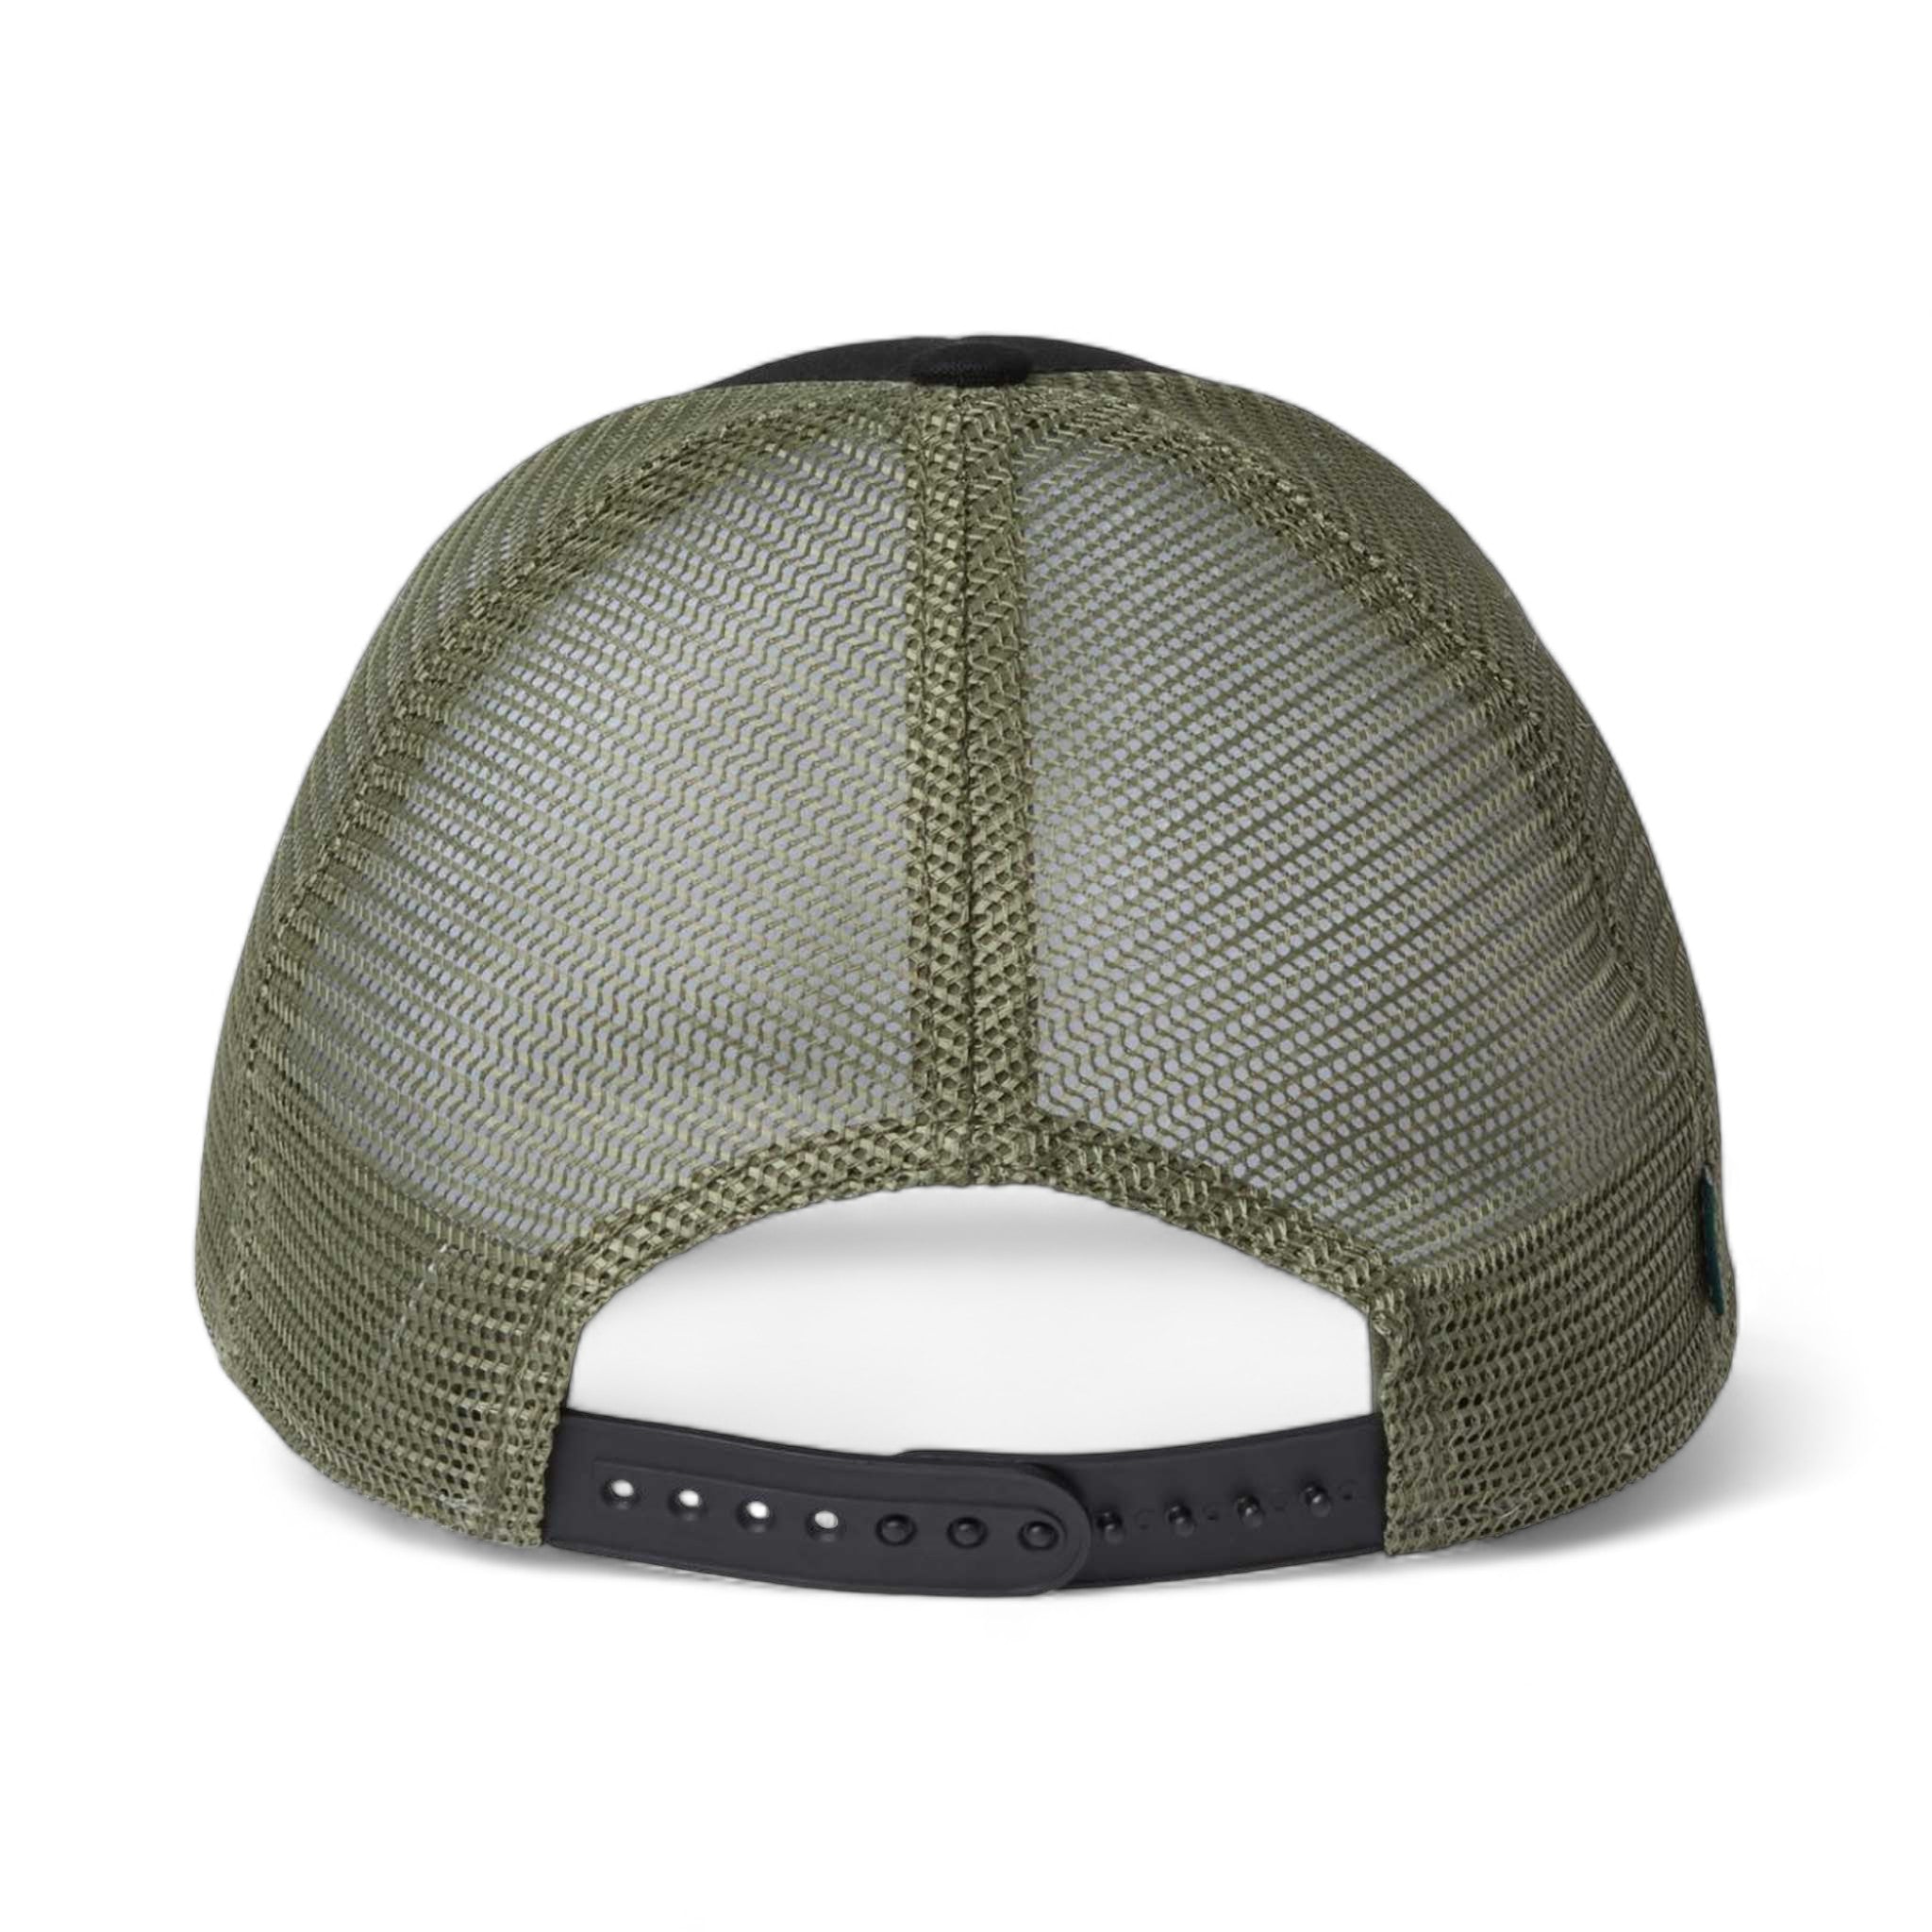 Back view of LEGACY LPS custom hat in black and light olive